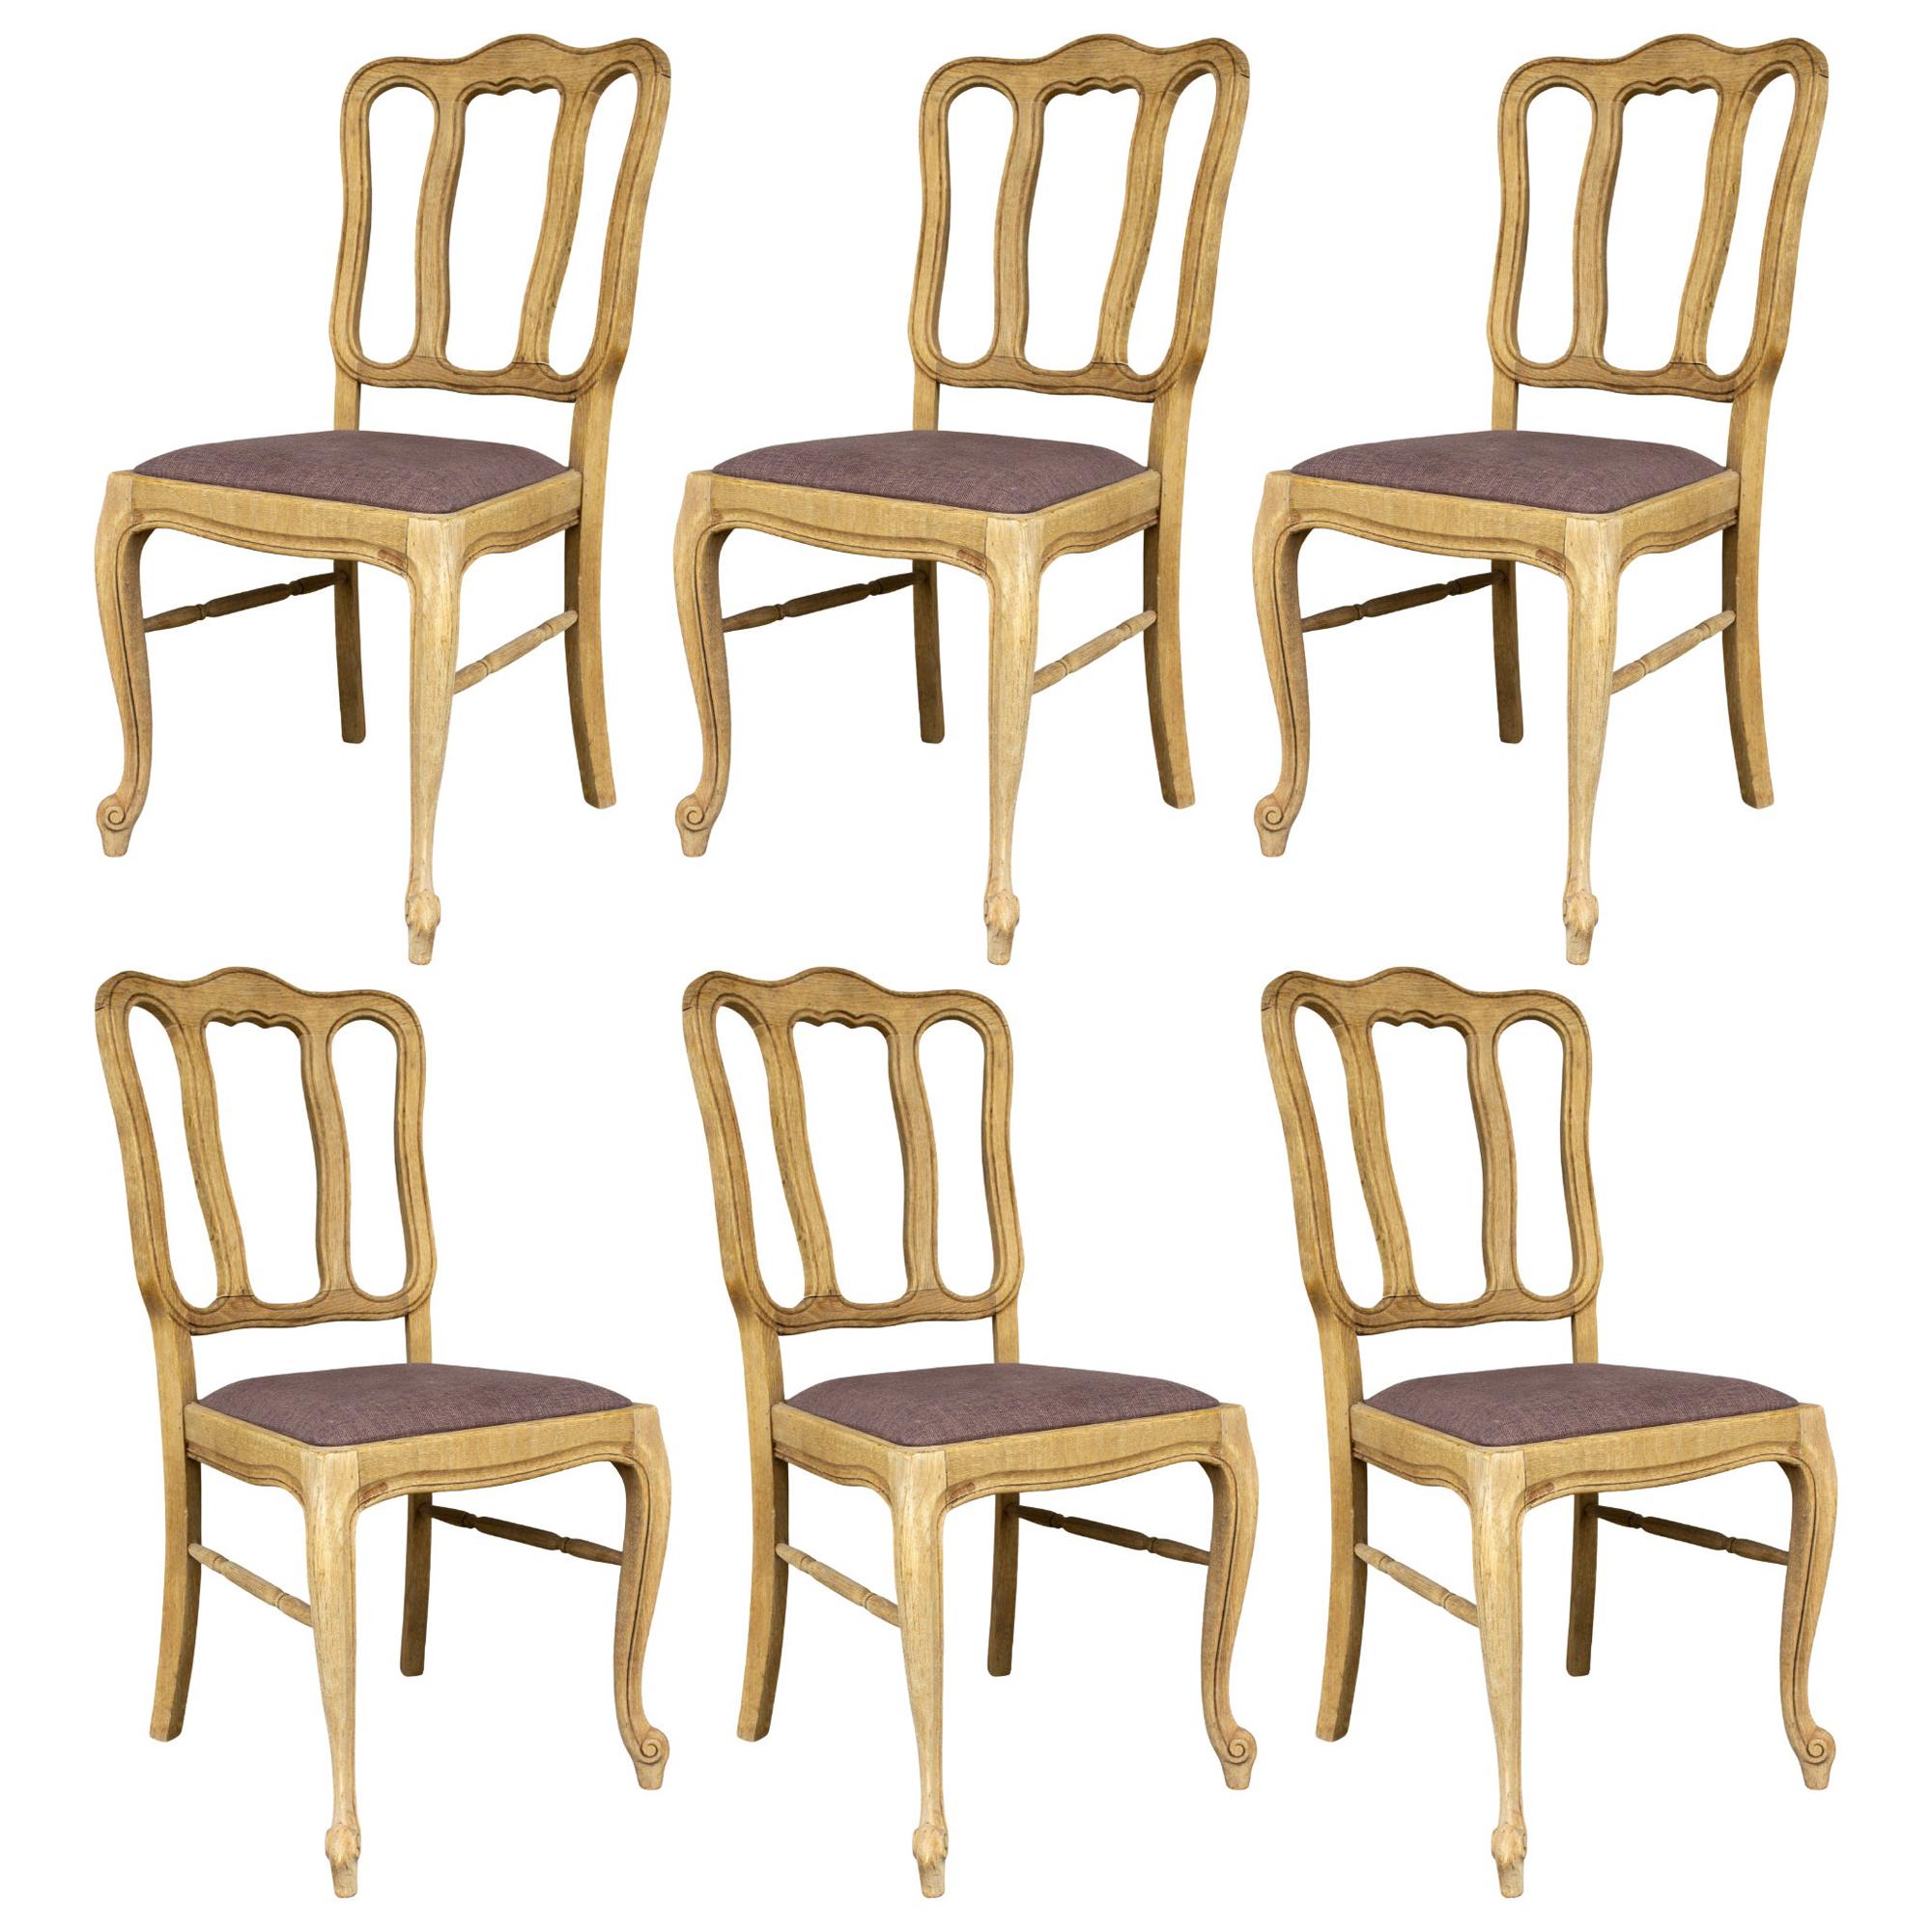 Vintage French Oak Dining Chairs with Linen Seats